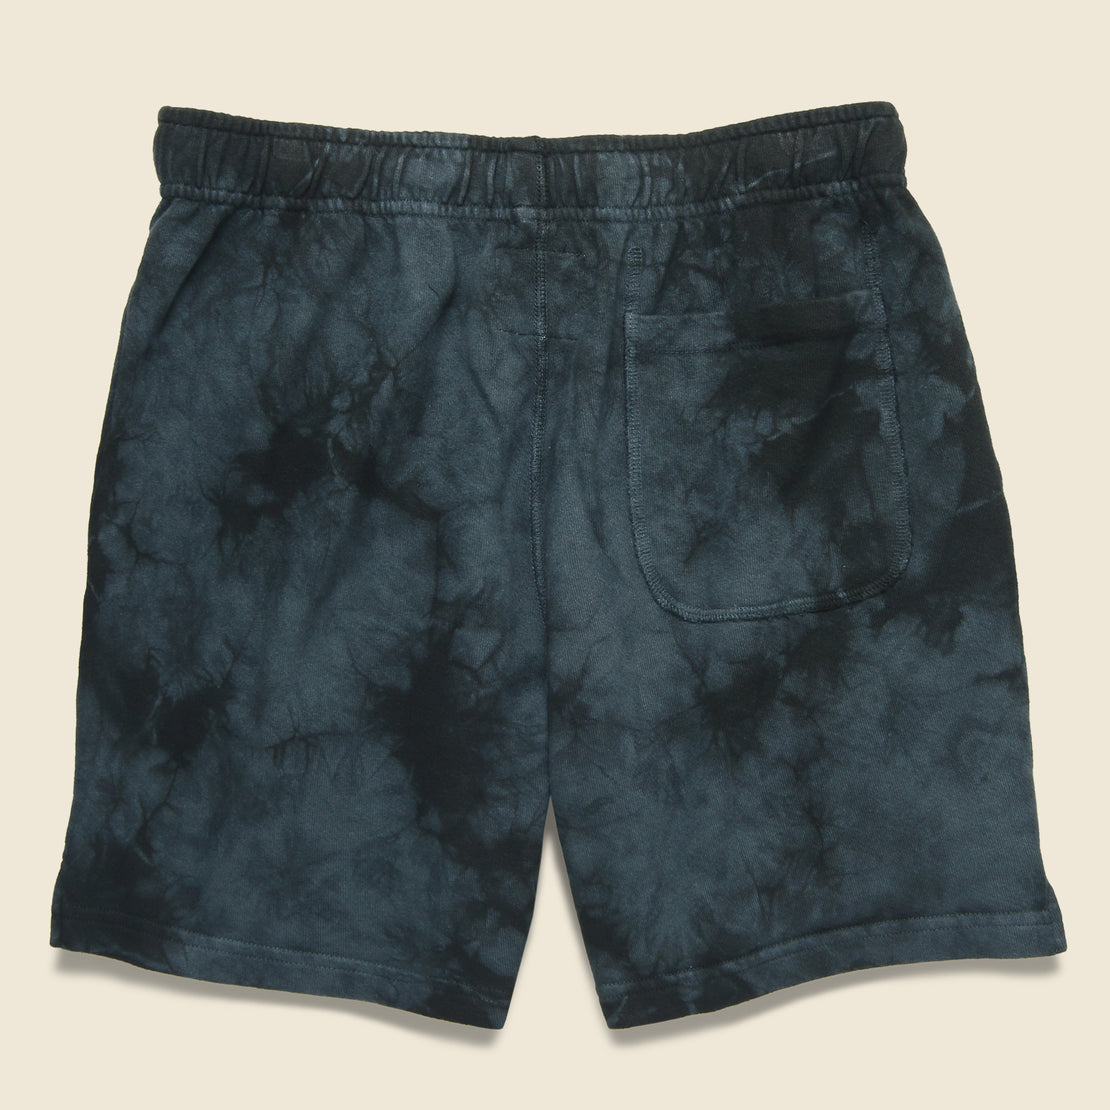 Warm Up Short - Black Tie Dye - Todd Snyder - STAG Provisions - Shorts - Lounge